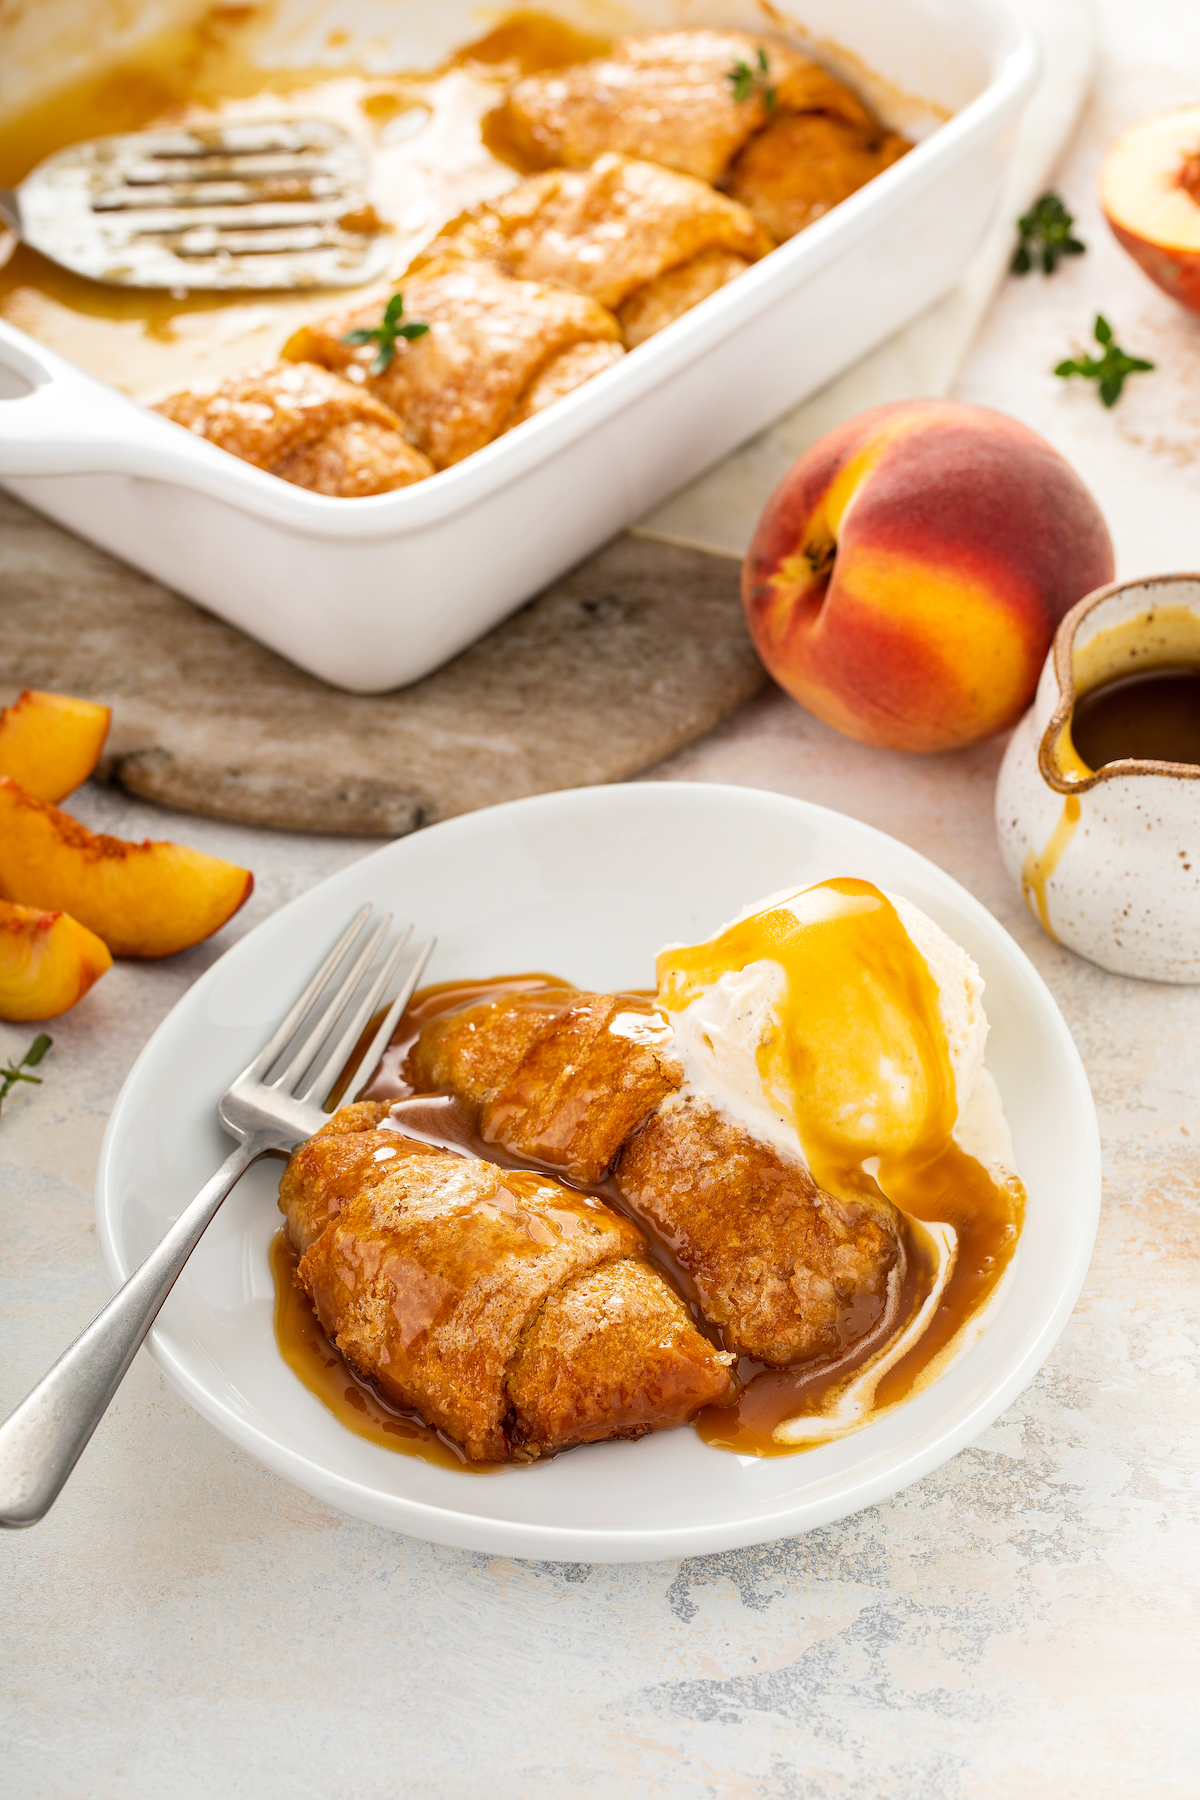 A pan of peach dumplings, with a small dessert plate served with dumplings, ice cream, and caramel sauce. A fresh peach and small pitcher of sauce are near the plate on the table.